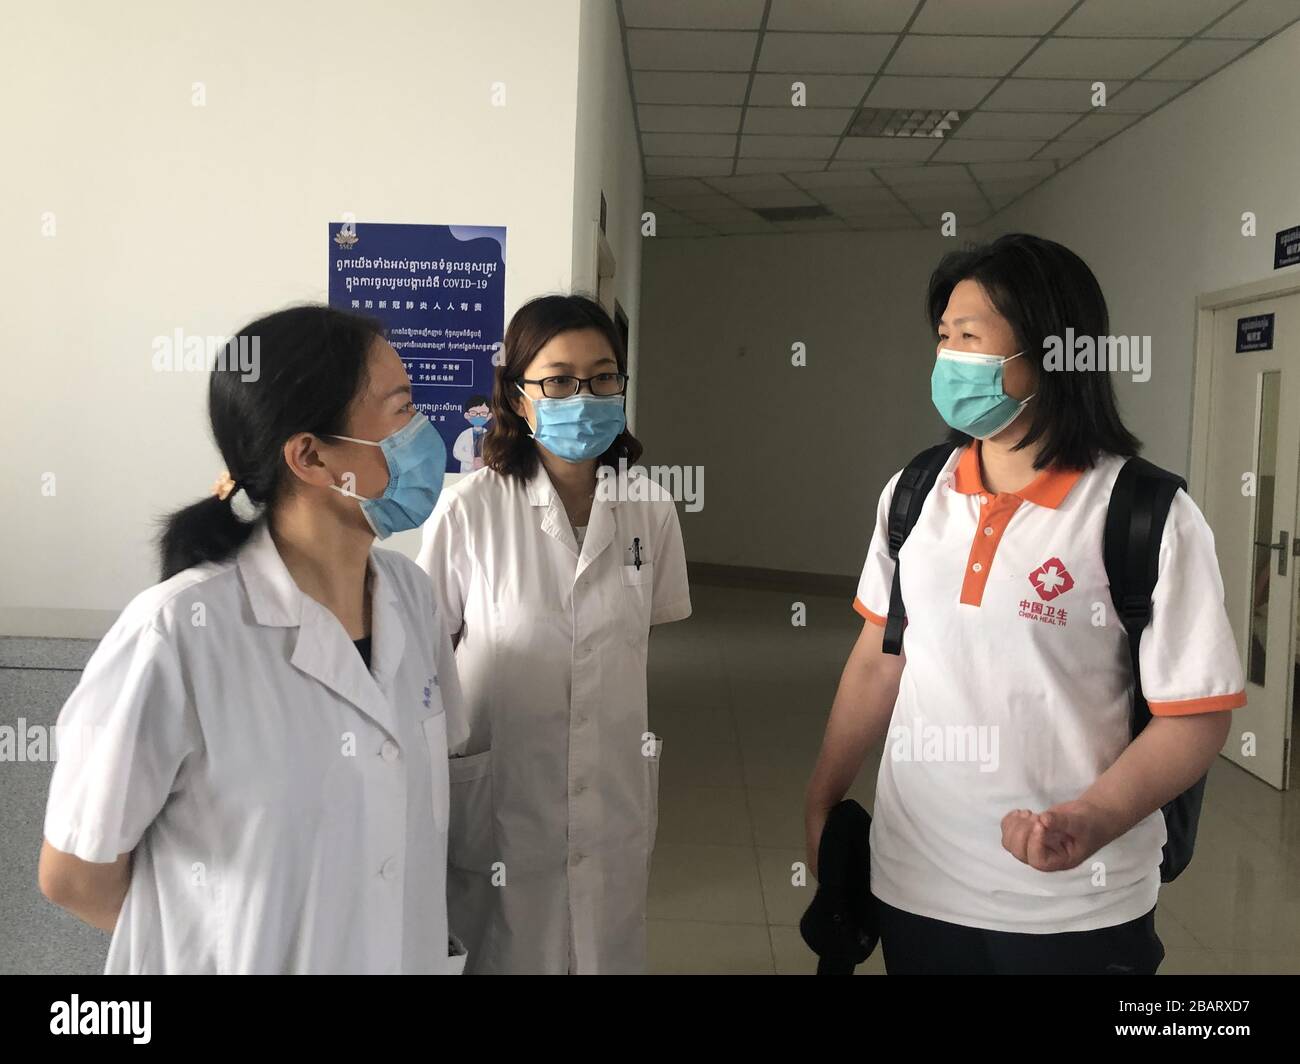 Phnom Penh, Cambodia. 29th Mar, 2020. Huang Luying (R), a Chinese medical expert, communicates with local medical workers at the Sihanoukville Special Economic Zone in Preah Sihanouk province, Cambodia, March 27, 2020. The Chinese medical team landed in Phnom Penh, capital of Cambodia, on March 23 to help combat the epidemic, as the Southeast Asian country has seen a spike in new confirmed cases in recent weeks. Credit: Xinhua/Alamy Live News Stock Photo